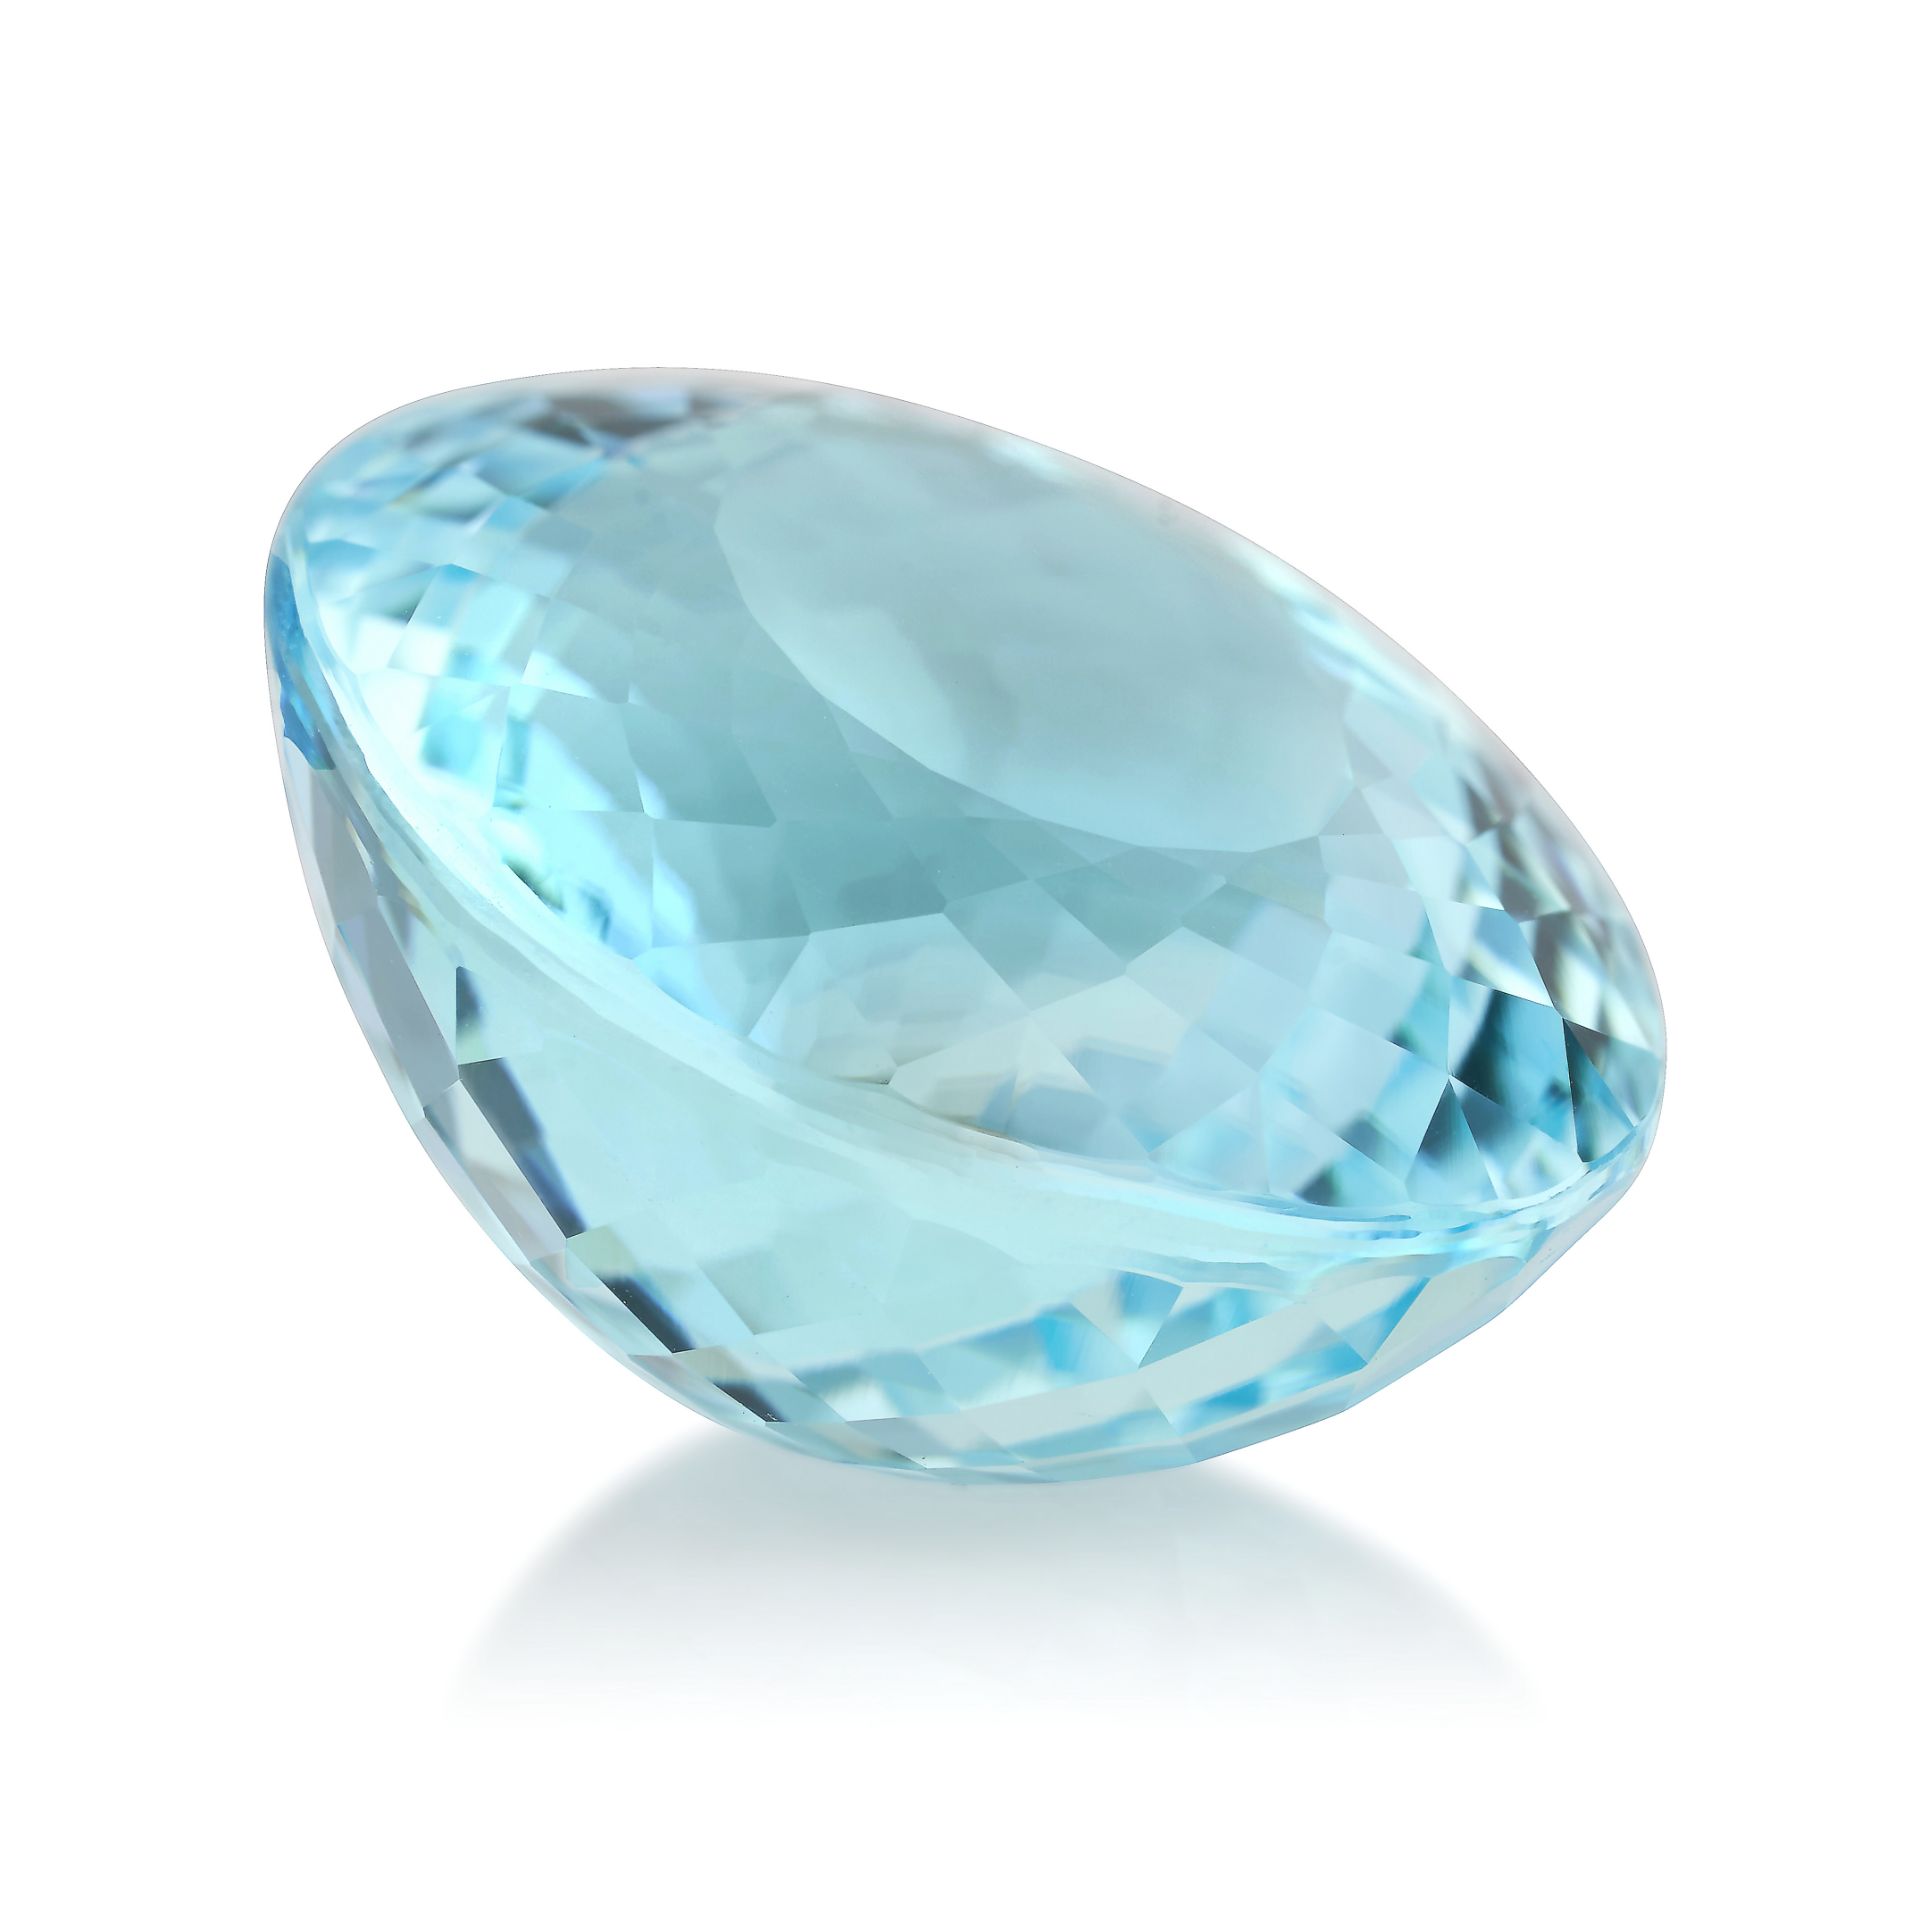 AN IMPORTANT PARAIBA TOURMALINE AND DIAMOND RING in platinum, set with an oval mixed cut Paraiba ... - Image 5 of 5